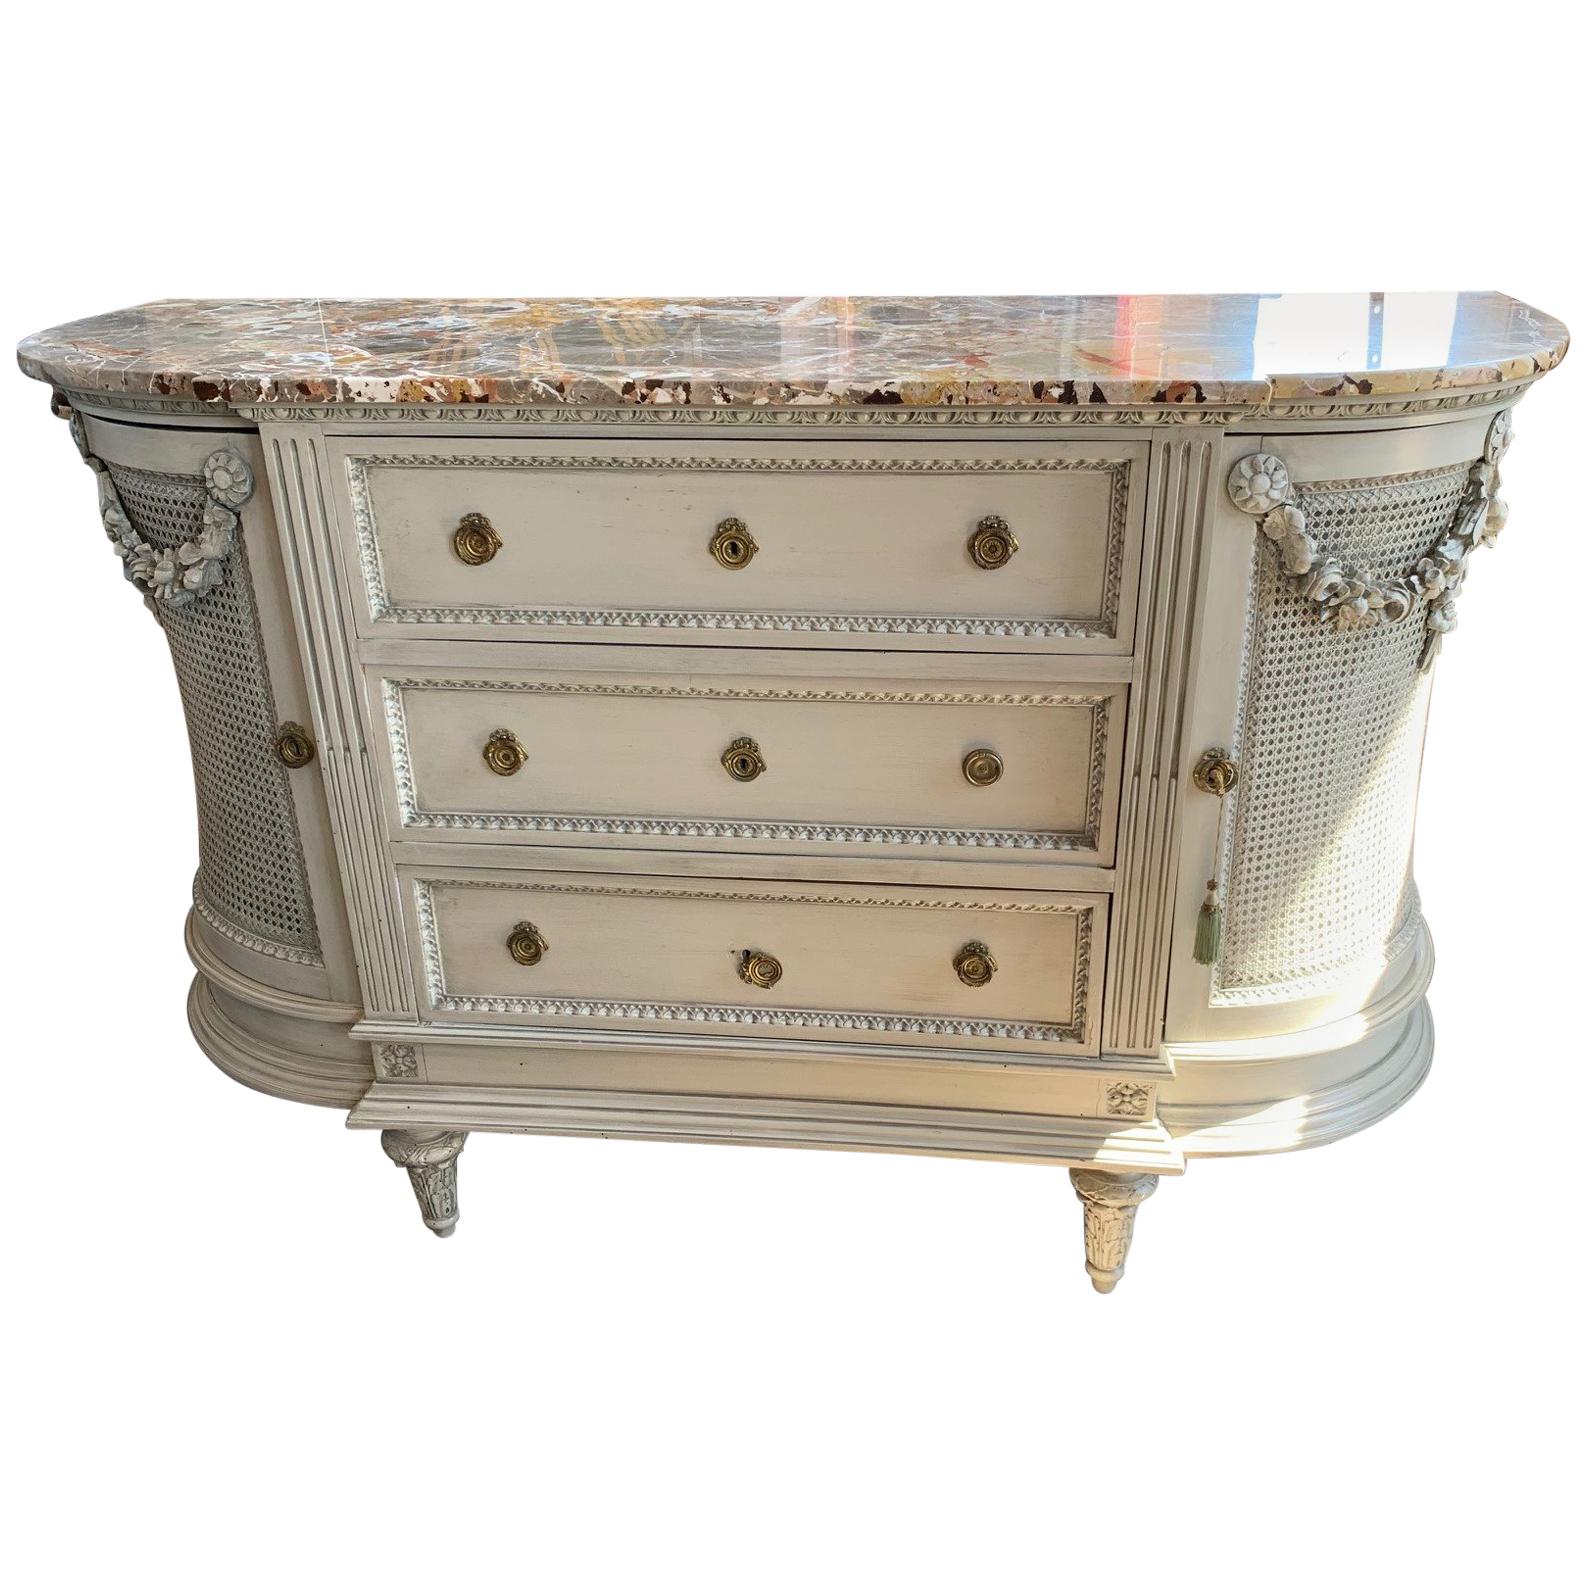 19th Century French Marble-Top Sideboard